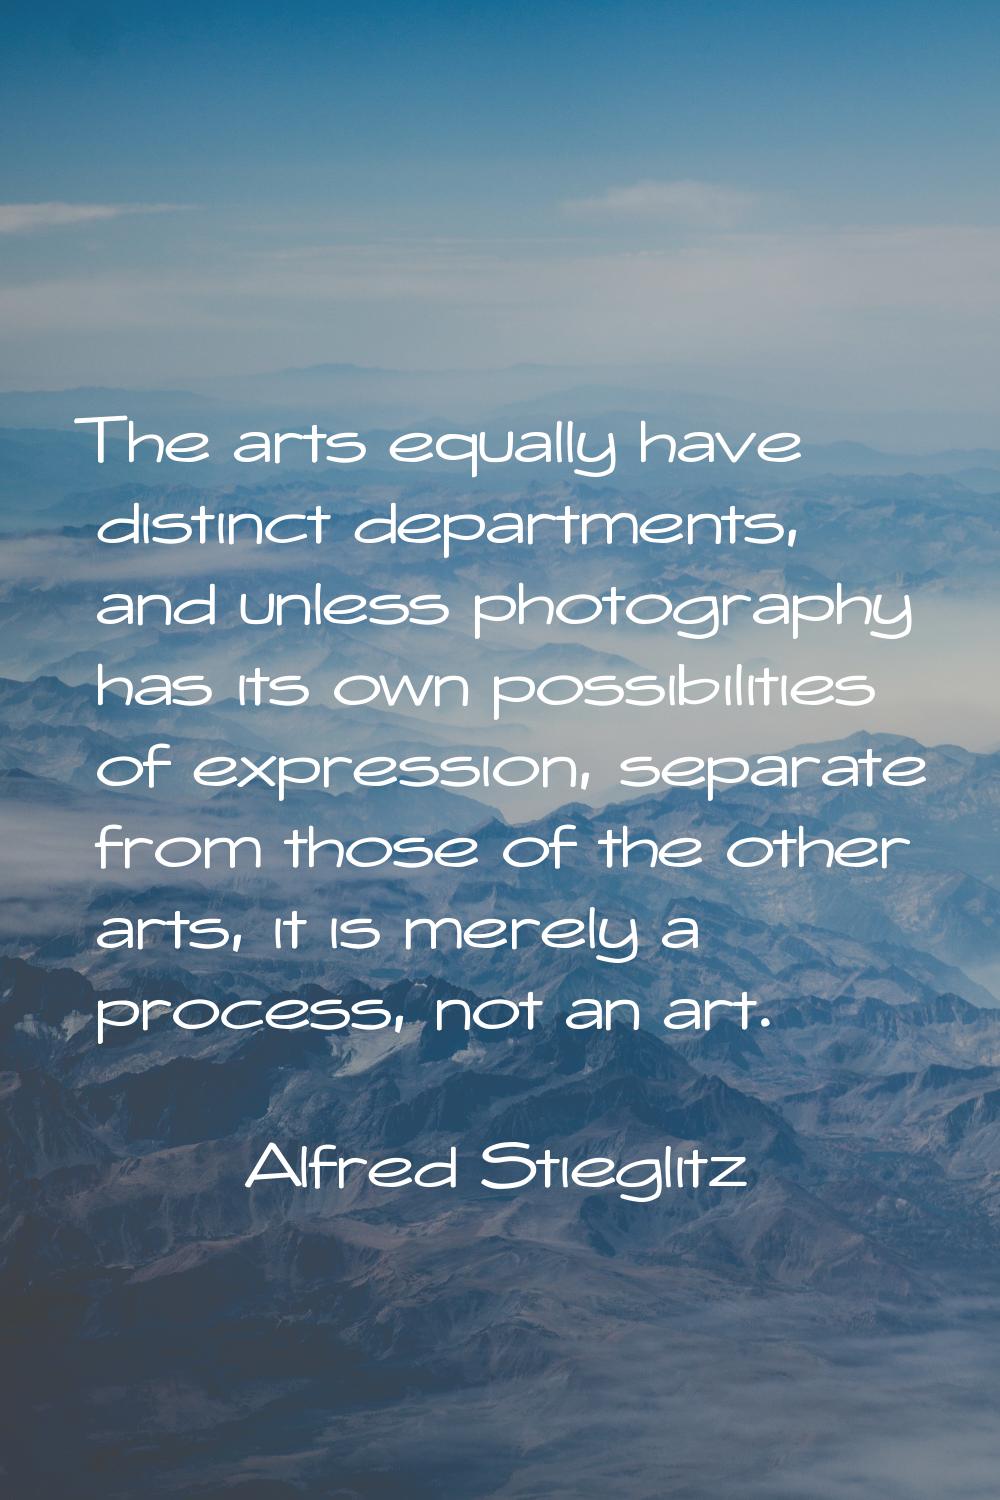 The arts equally have distinct departments, and unless photography has its own possibilities of exp